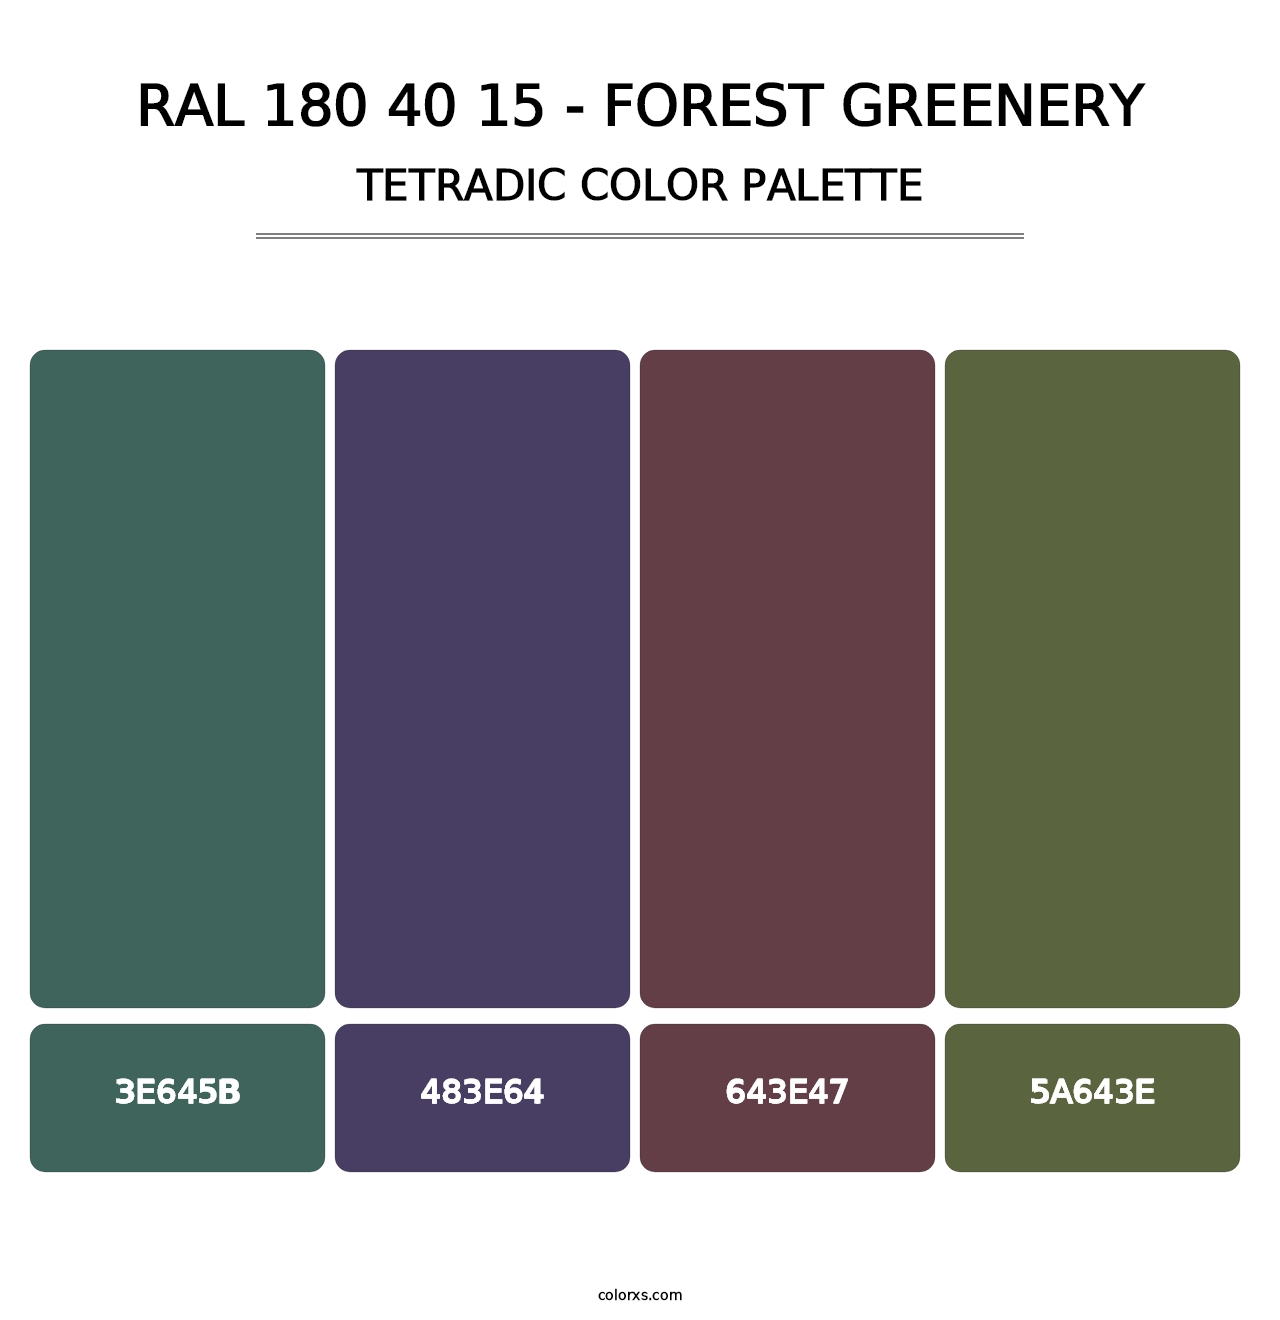 RAL 180 40 15 - Forest Greenery - Tetradic Color Palette